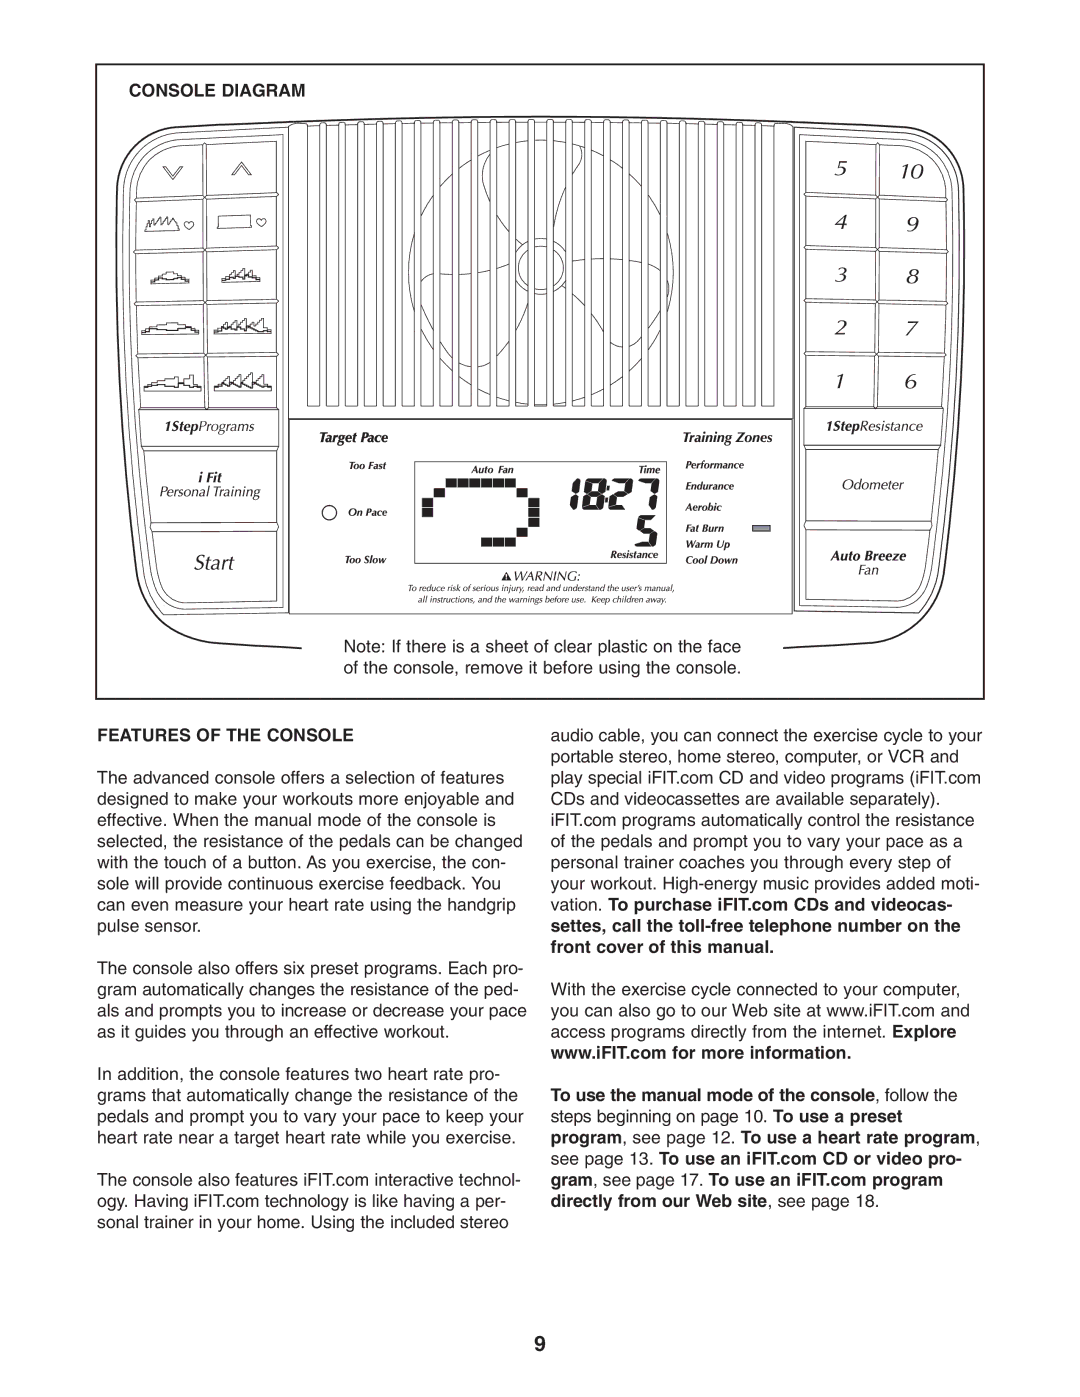 NordicTrack 30507.0 user manual Console Diagram Features of the Console 